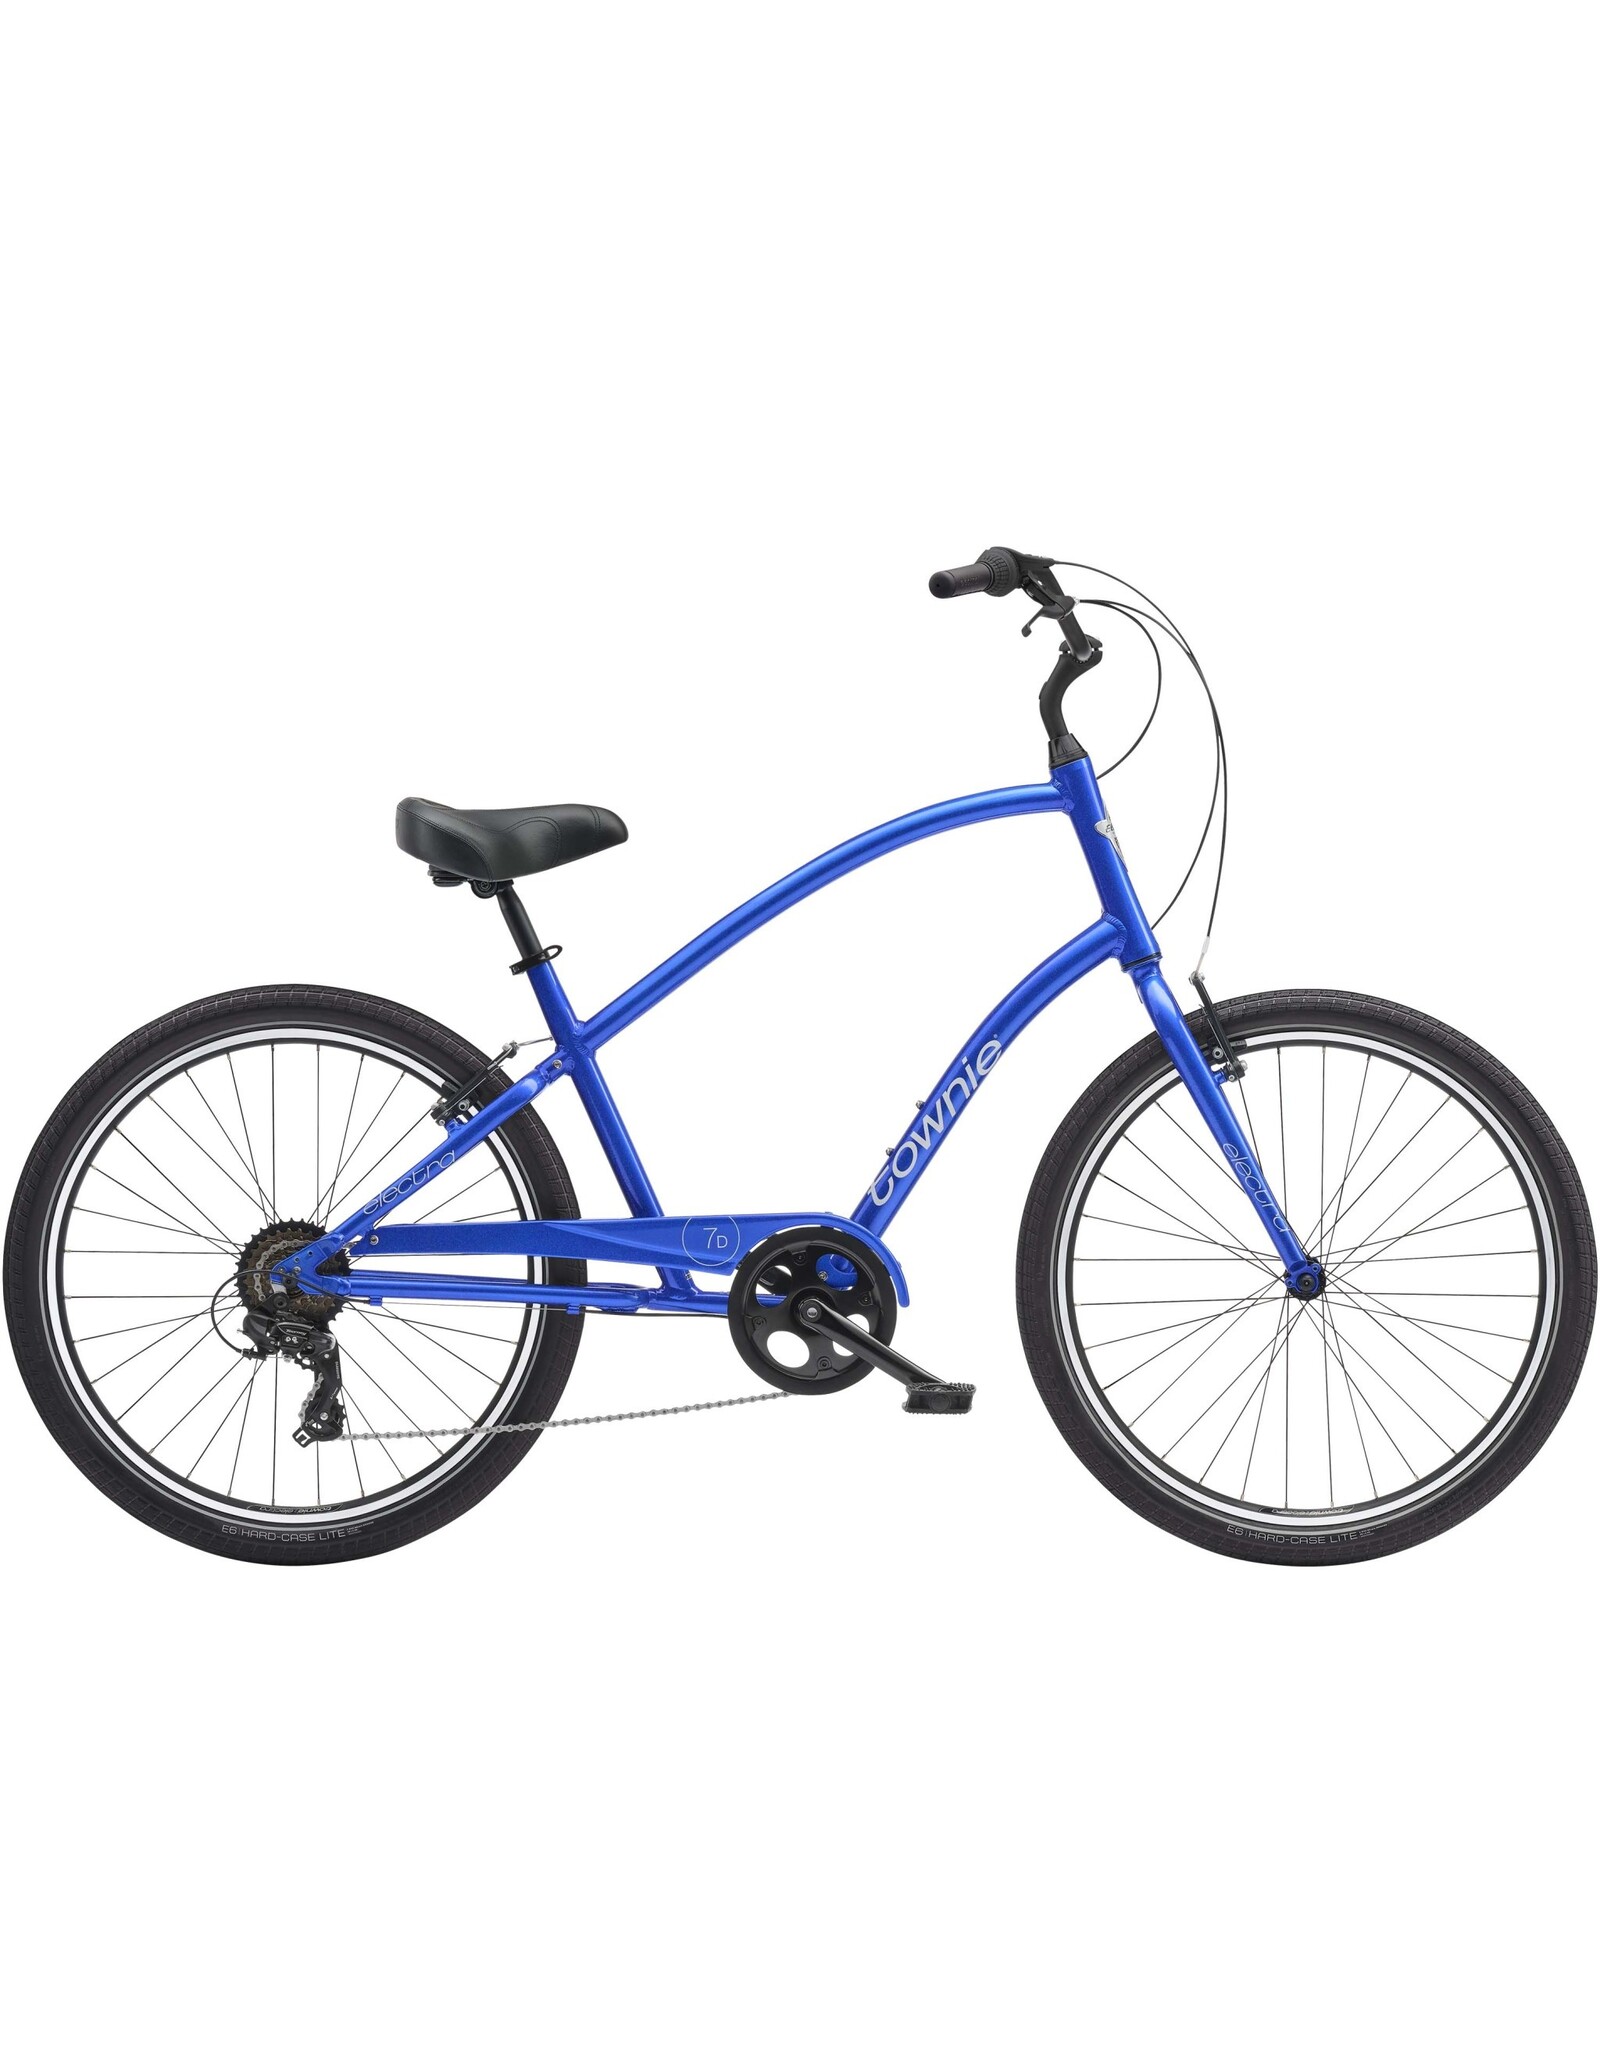 Townie Electra Townie 7D Step-Over Hyper Blue